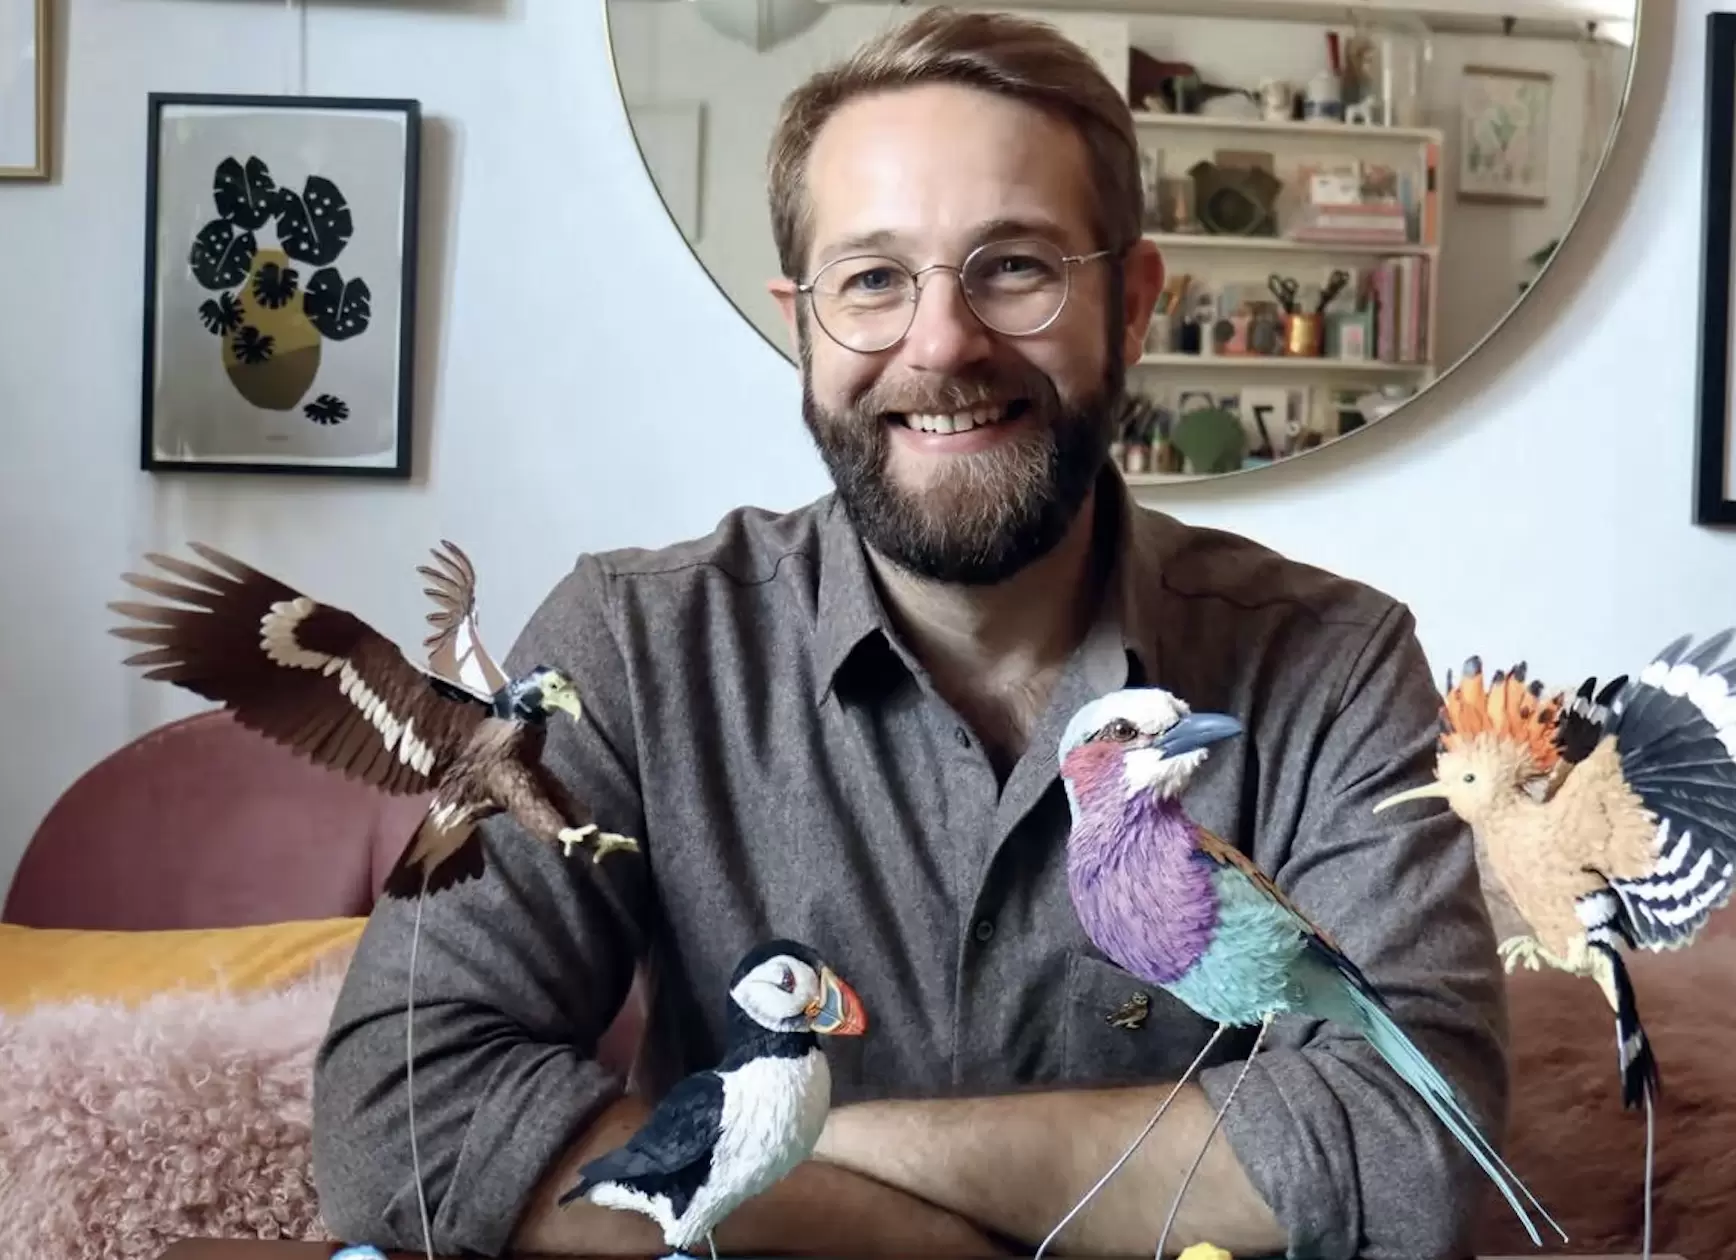 Zack McLaughlin, founder of Paper and Wood, sat with some of his paper bird sculptures